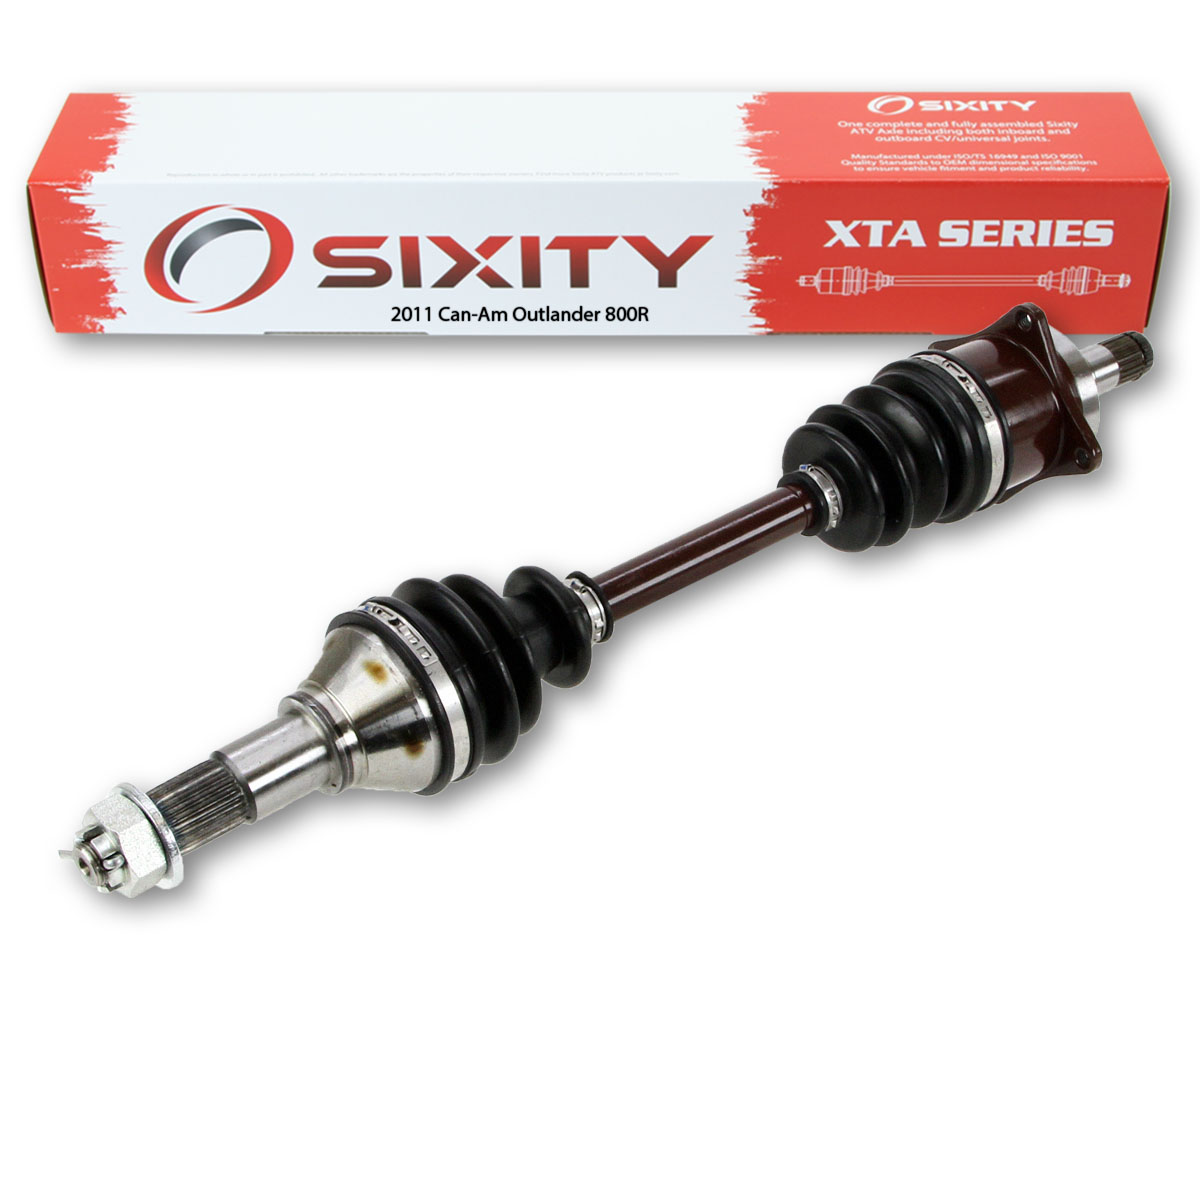 Sixity 2011 Can-Am Outlander 800R 4X4 Front Left XTA ATV Axle